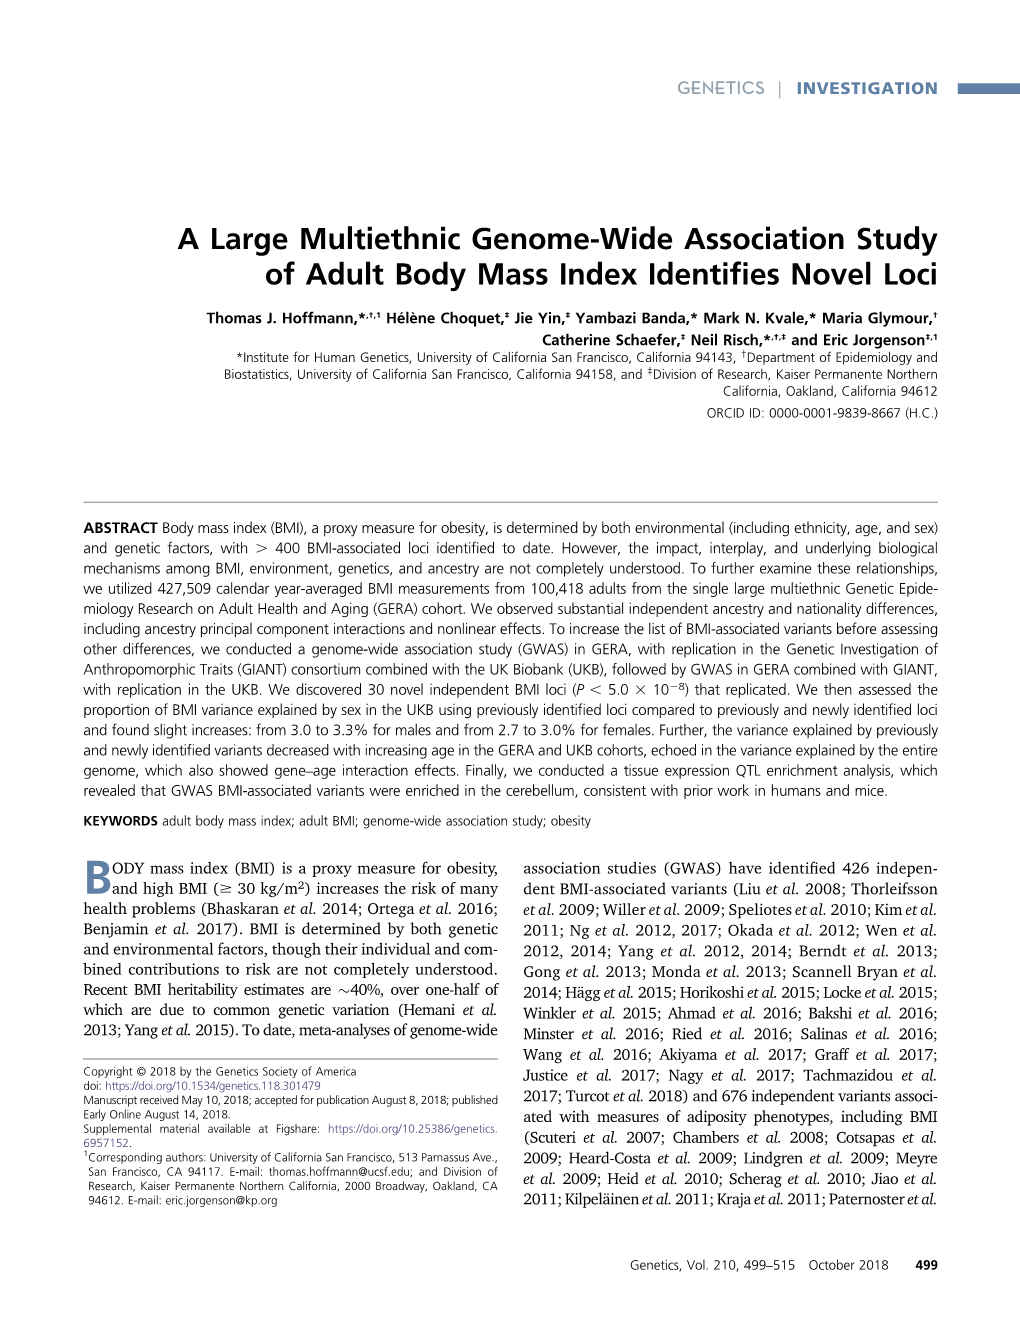 A Large Multiethnic Genome-Wide Association Study of Adult Body Mass Index Identiﬁes Novel Loci